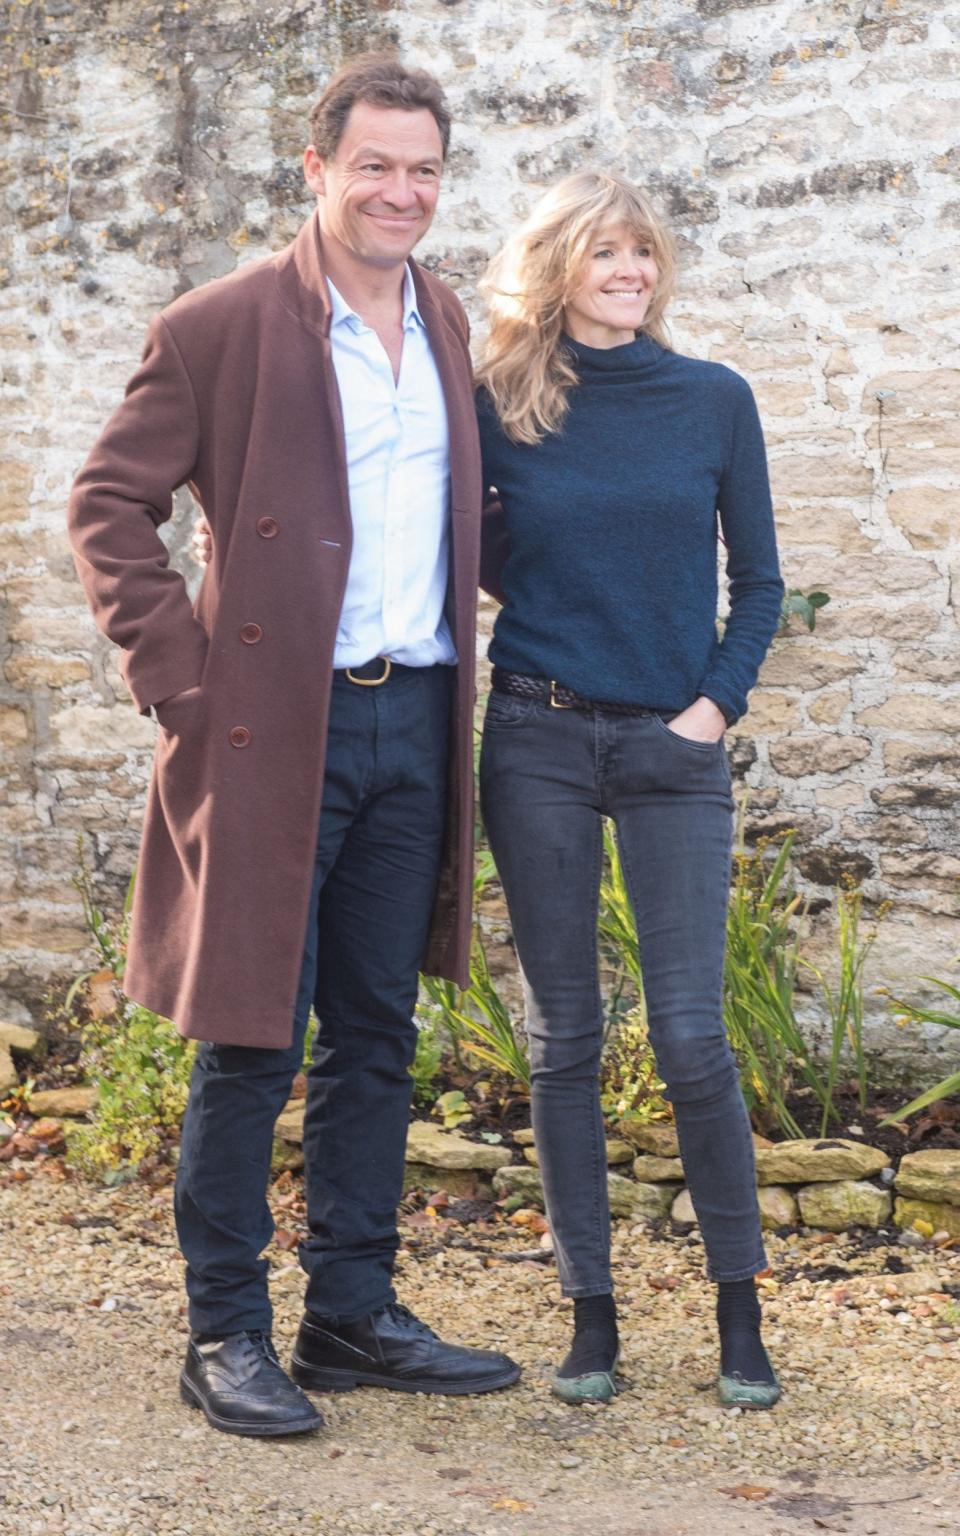 Dominic West and Catherine FitzGerald - GlosPics/MEGA